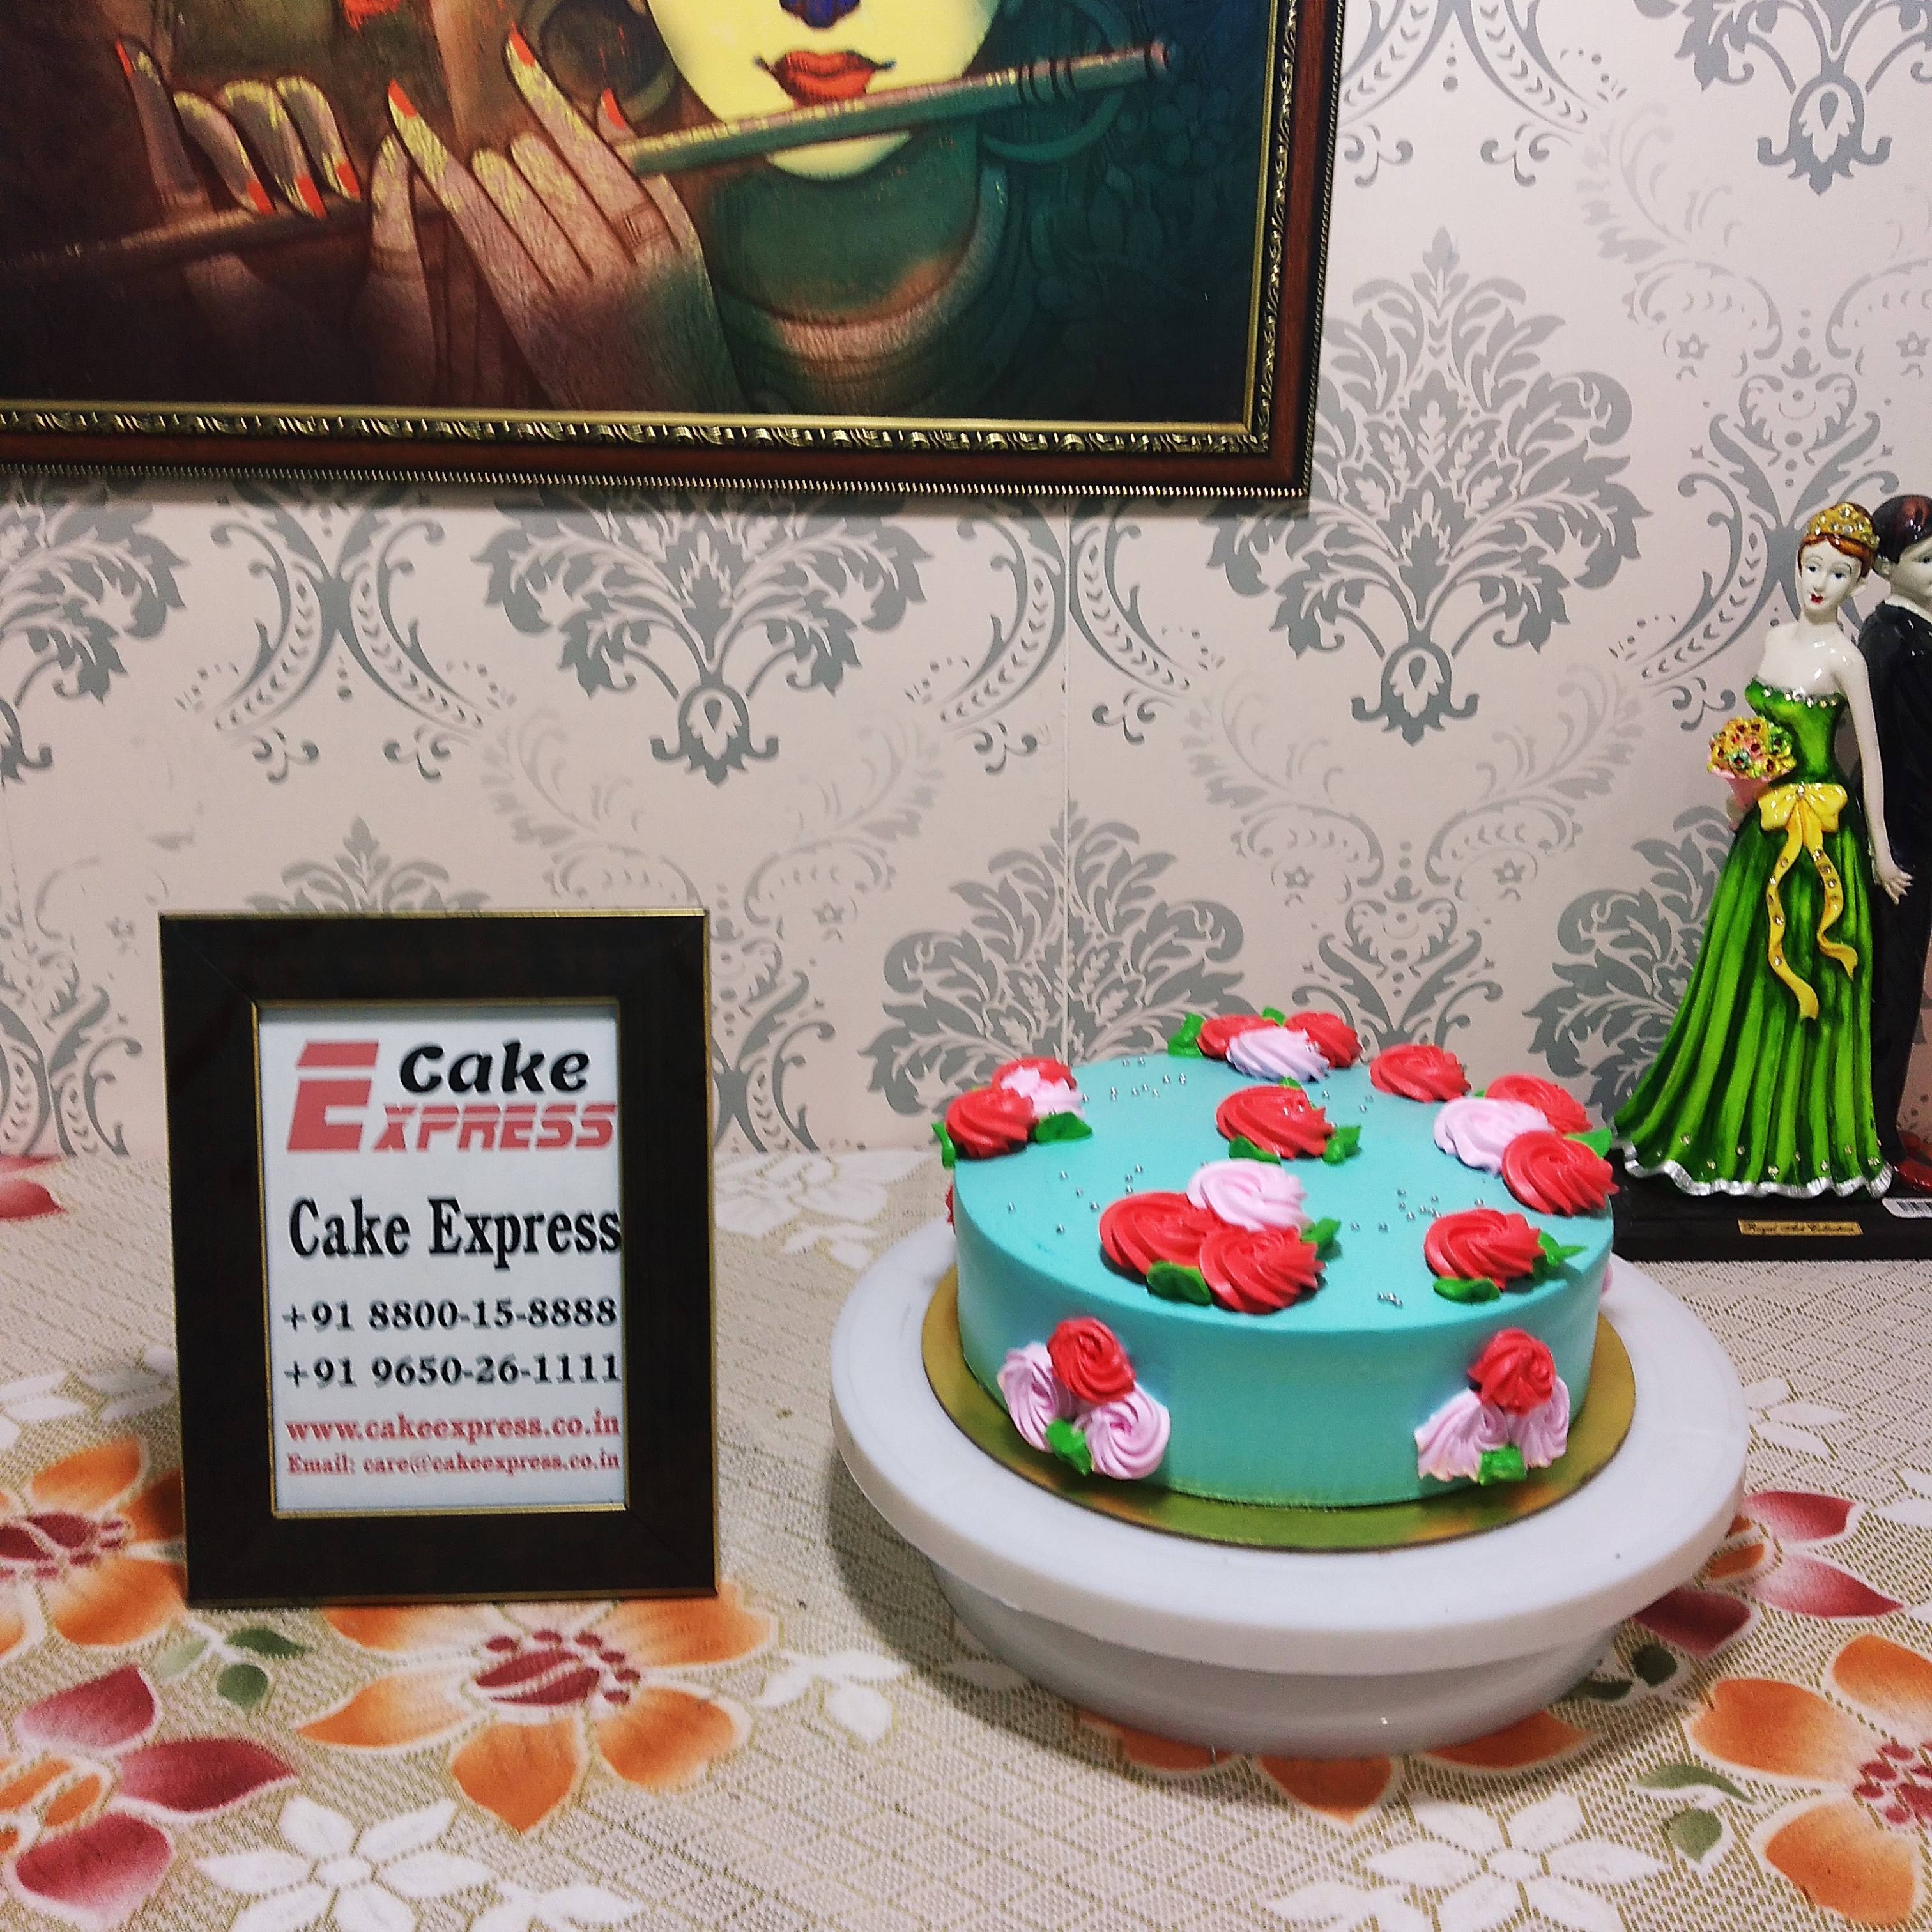 Cake Delivery in Ghaziabad Online by onlinecakedelhi on DeviantArt